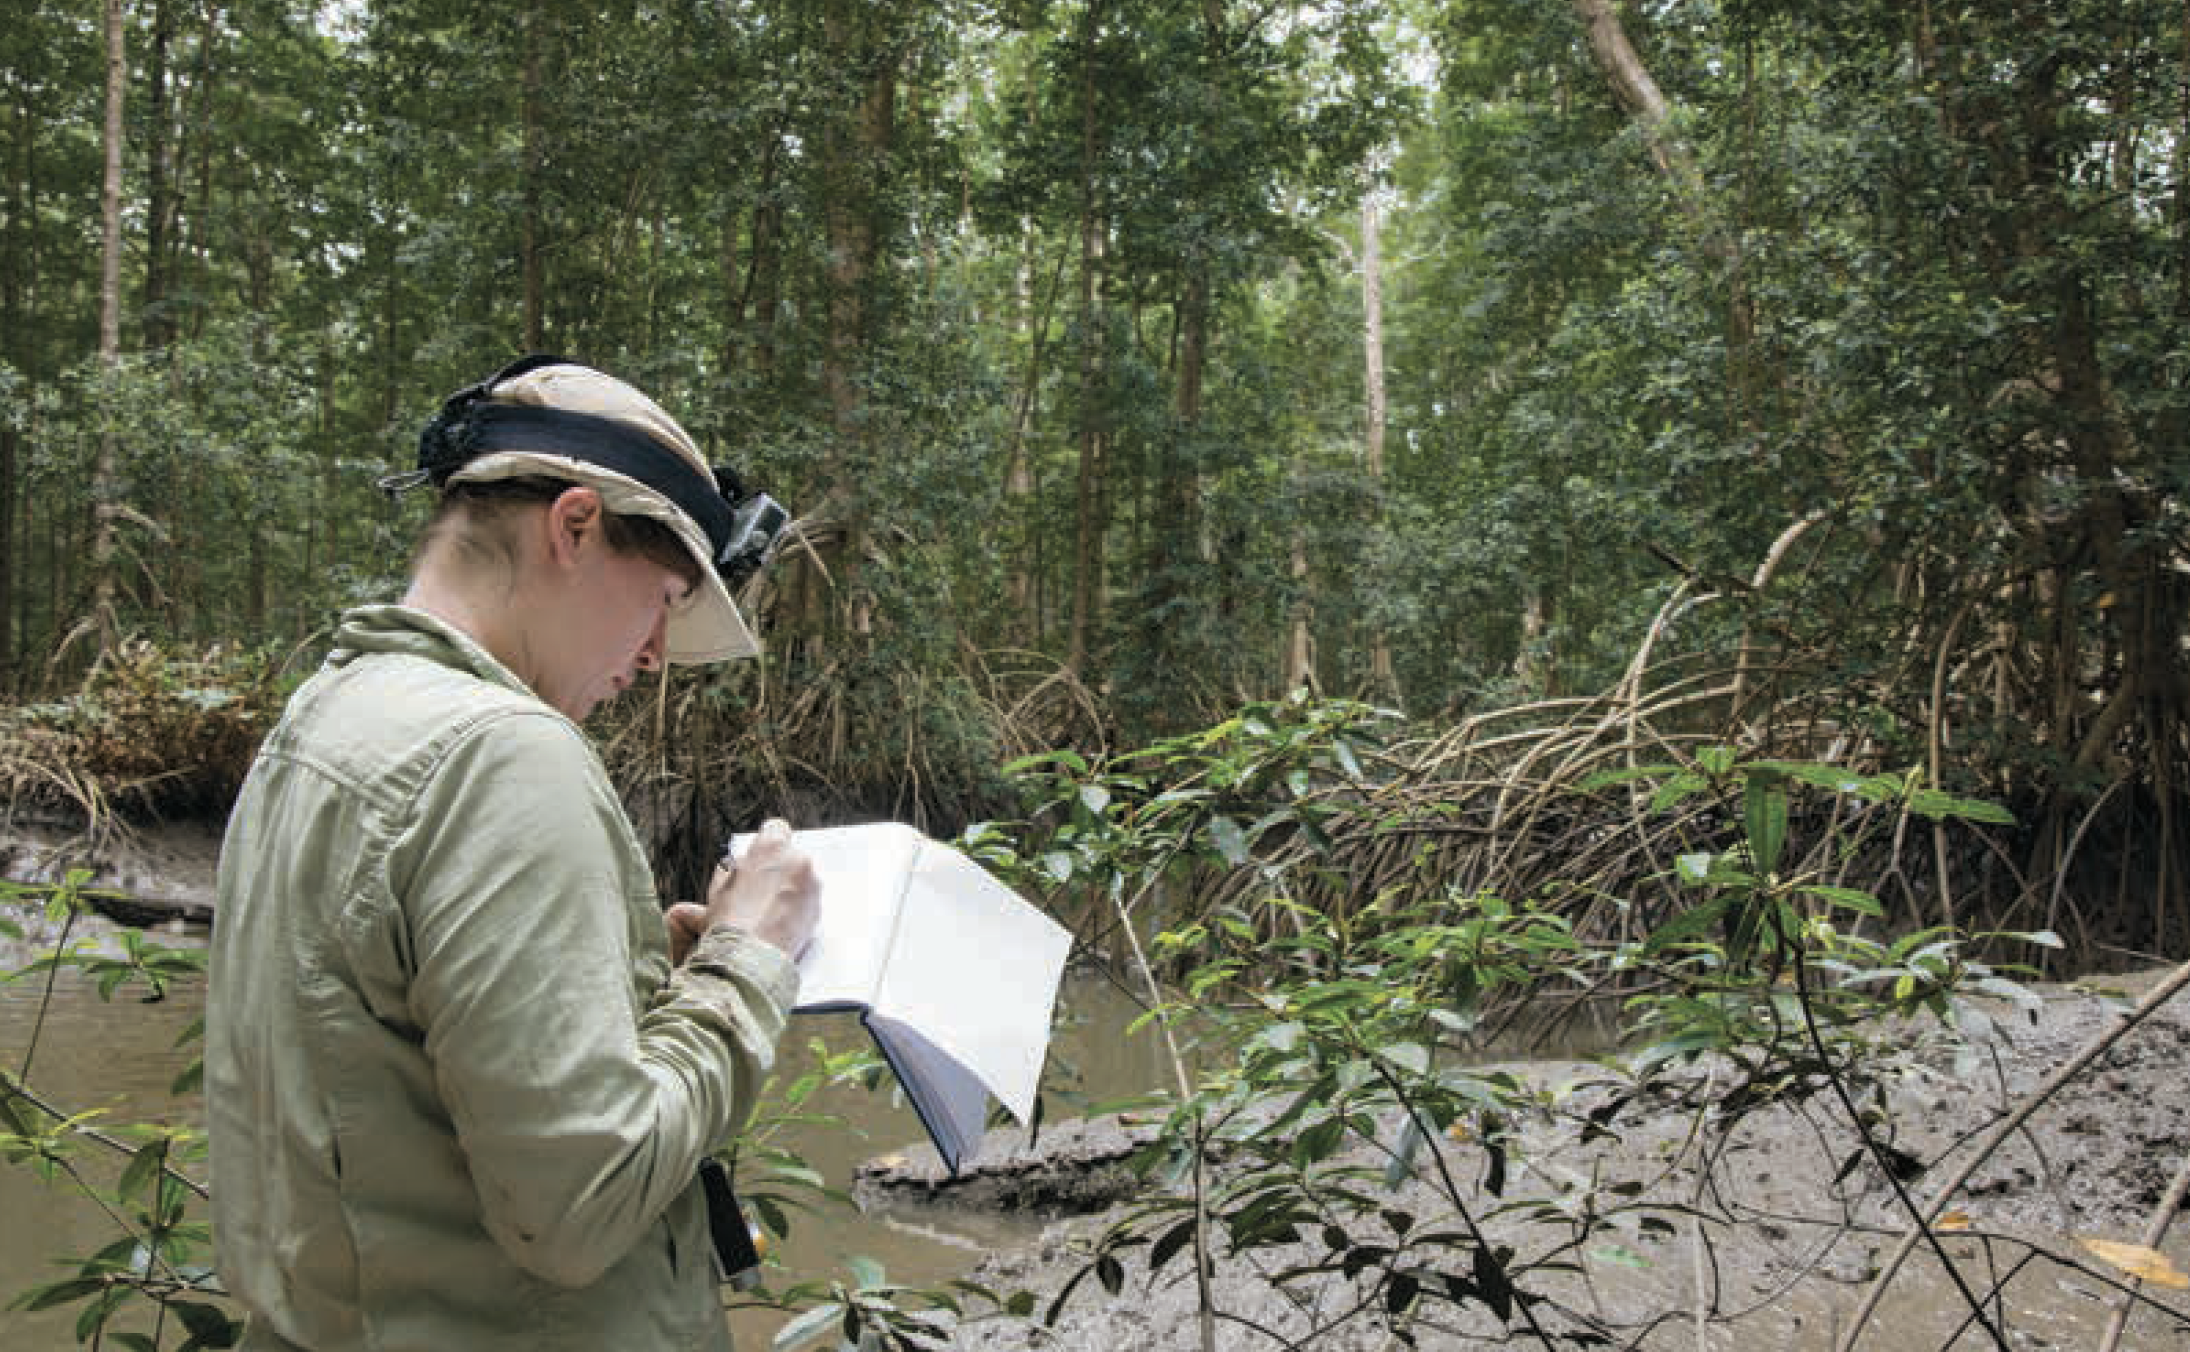 A researcher records data on the mangrove forest.